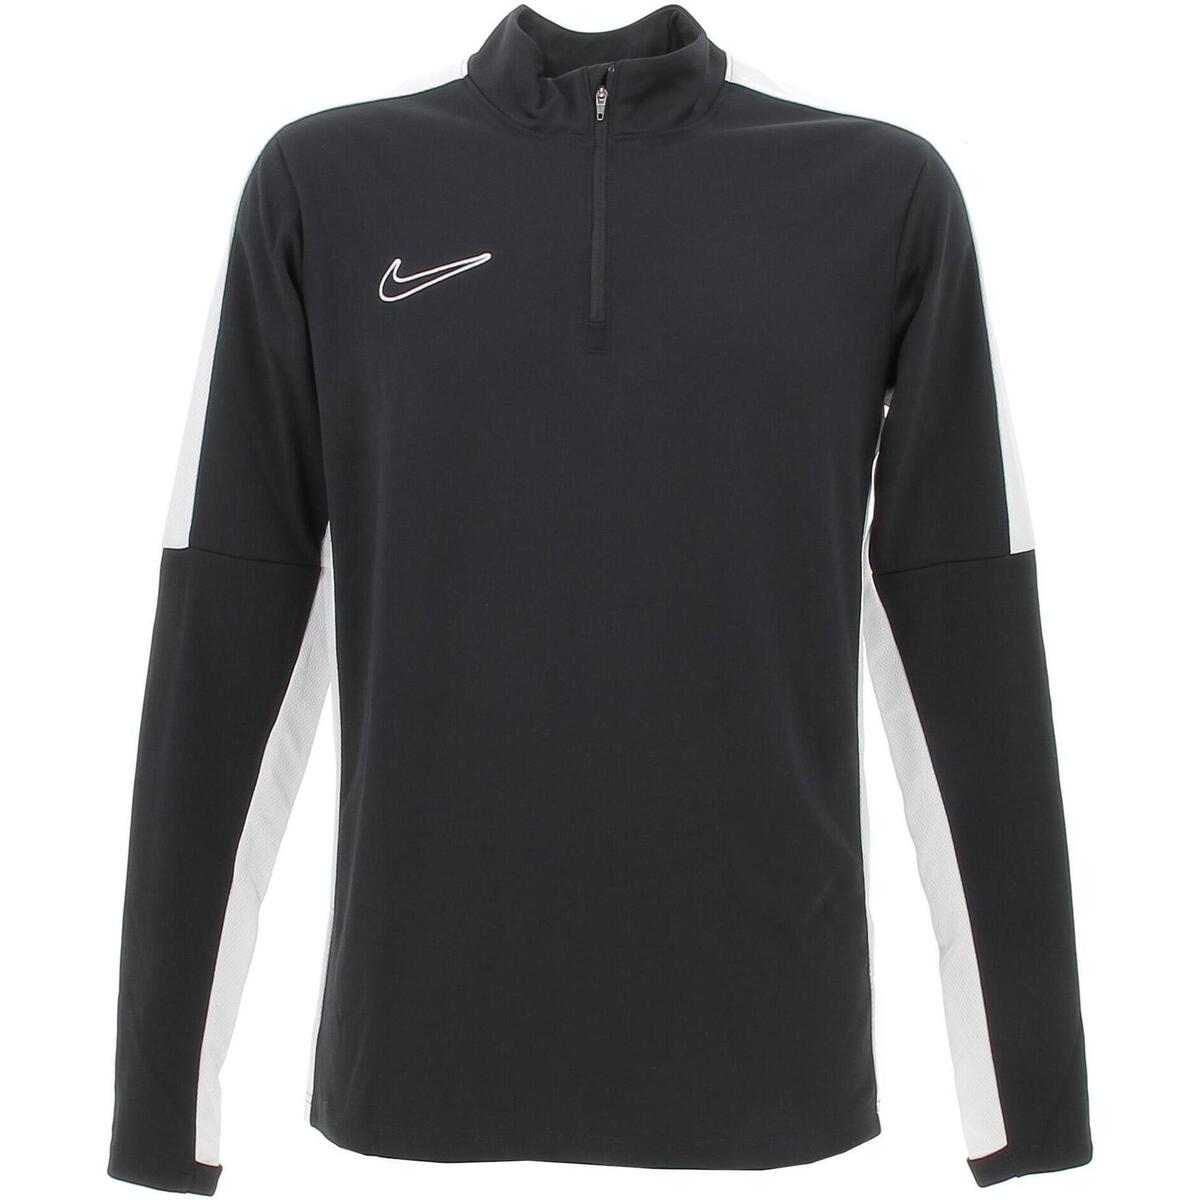 Nike M nk df acd23 dril top br 25711279 1200 A